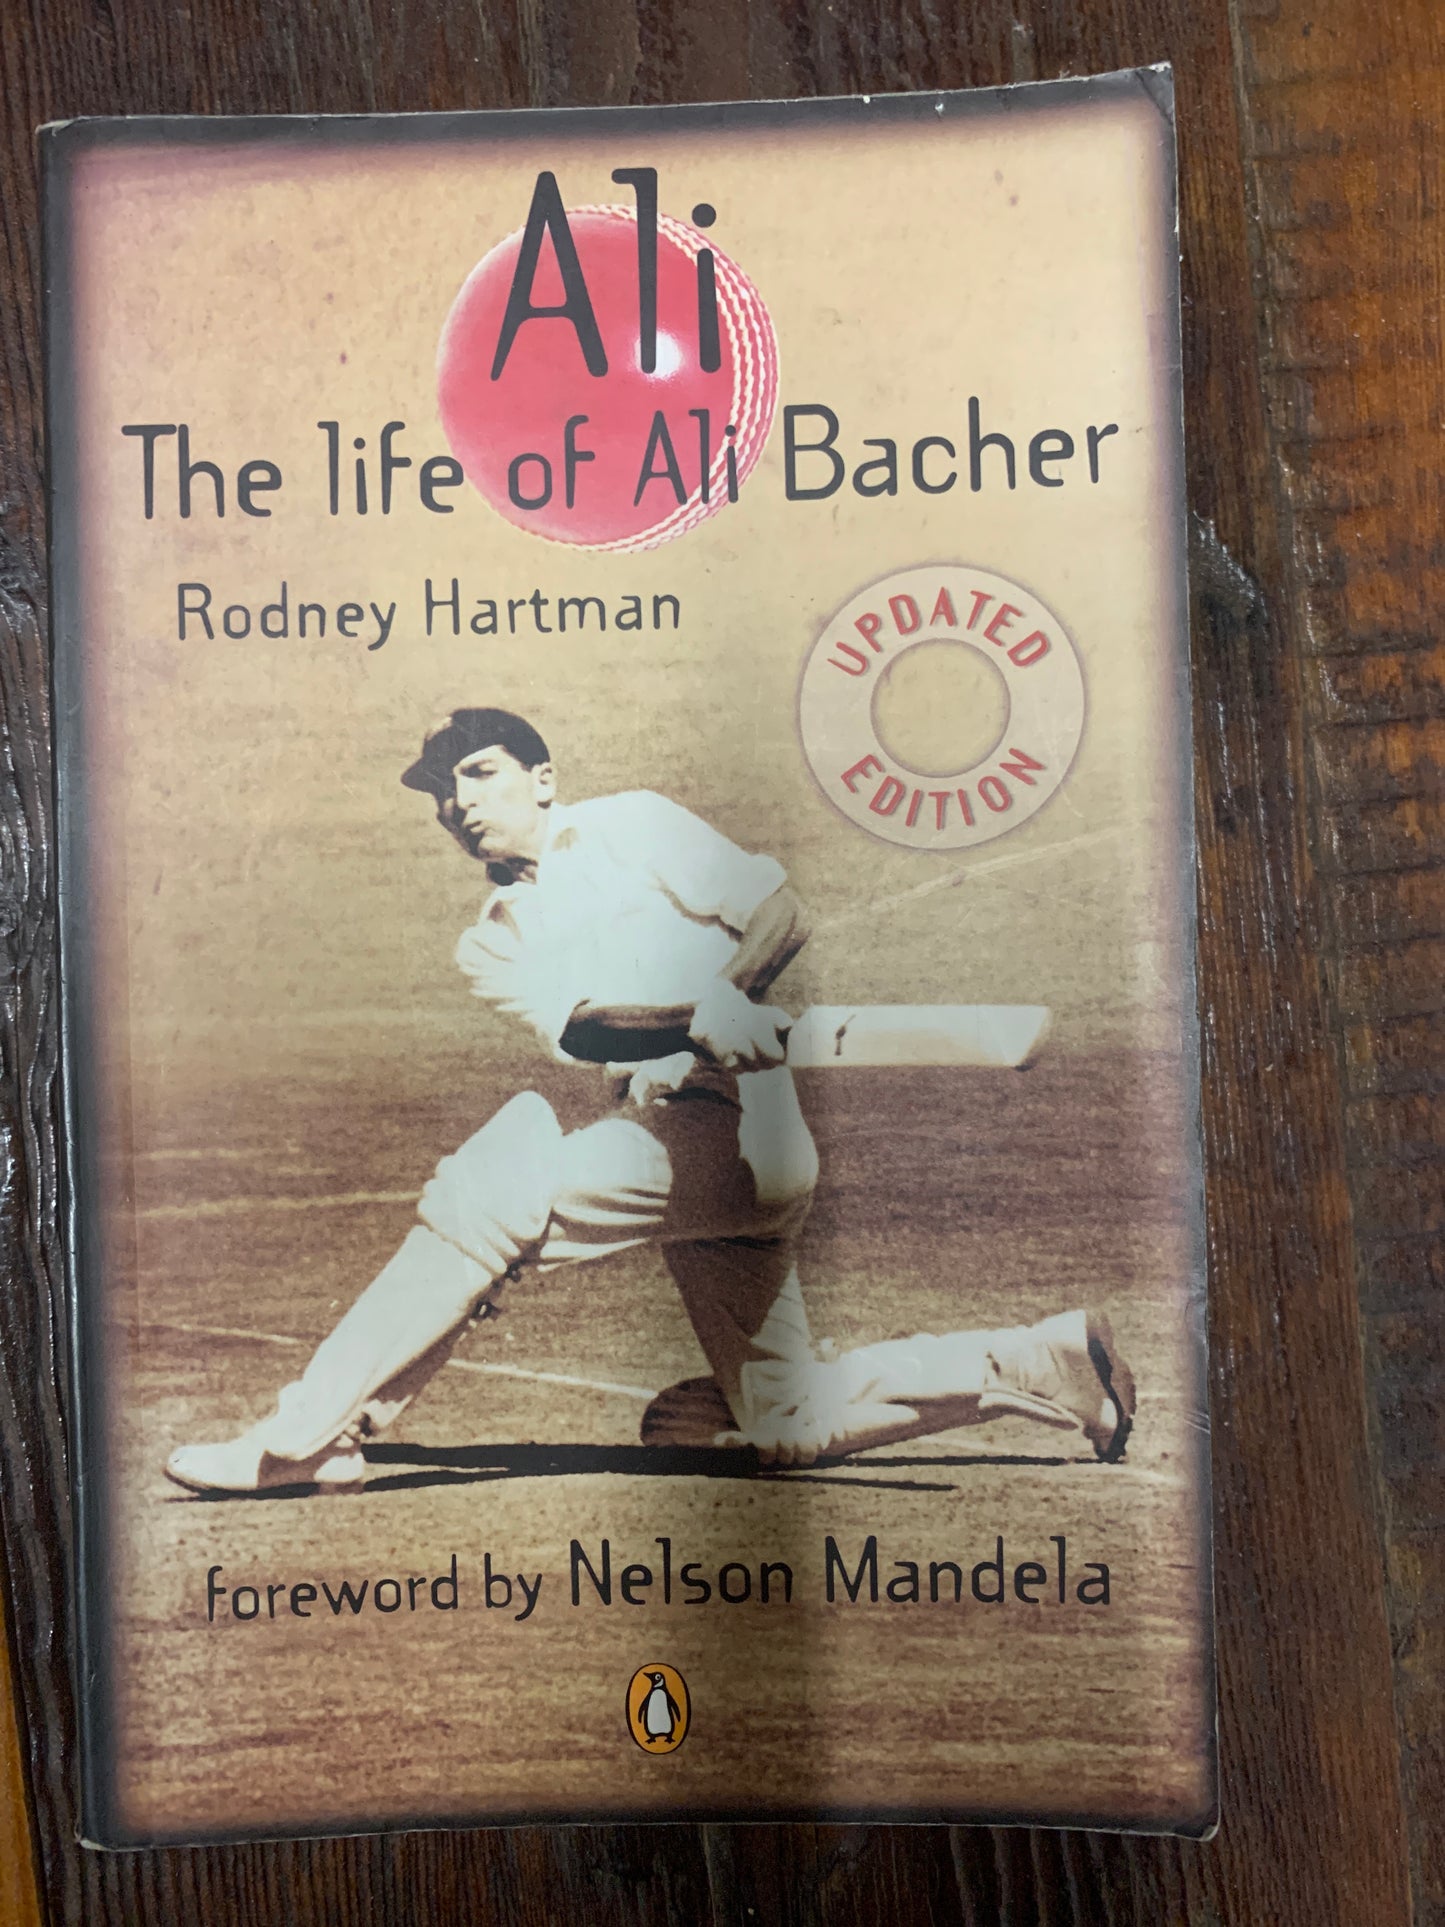 Ali: The life of Ali Bacher (used), by Rodney Hartman